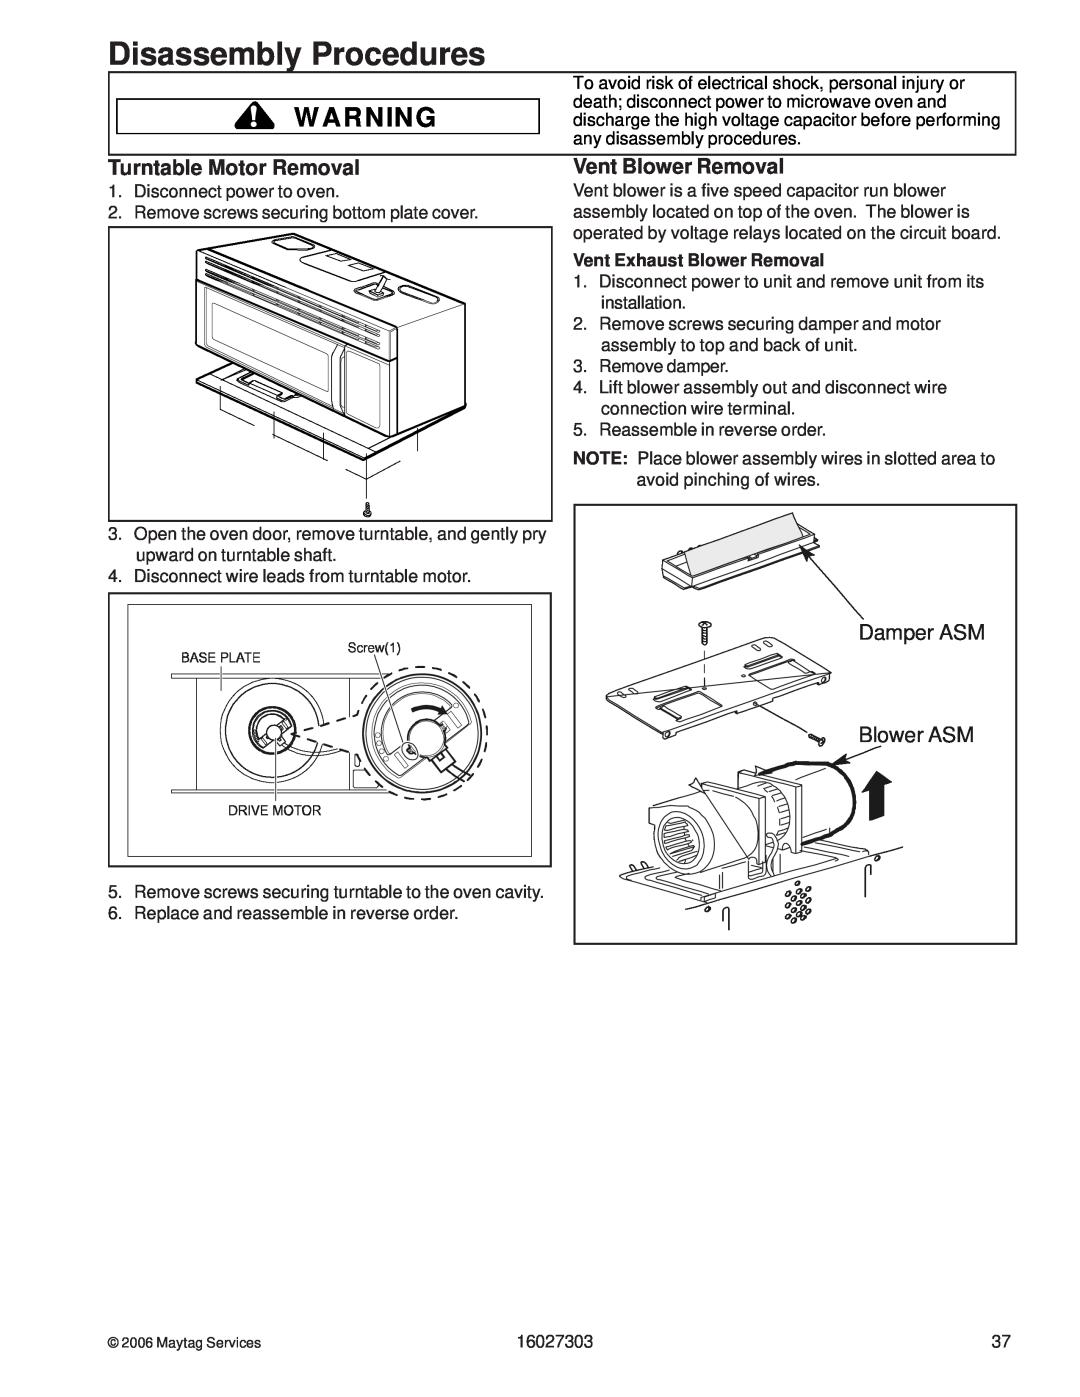 Maytag UMV1152CA manual Turntable Motor Removal, Vent Blower Removal, Disassembly Procedures, Blower ASM, Damper ASM 